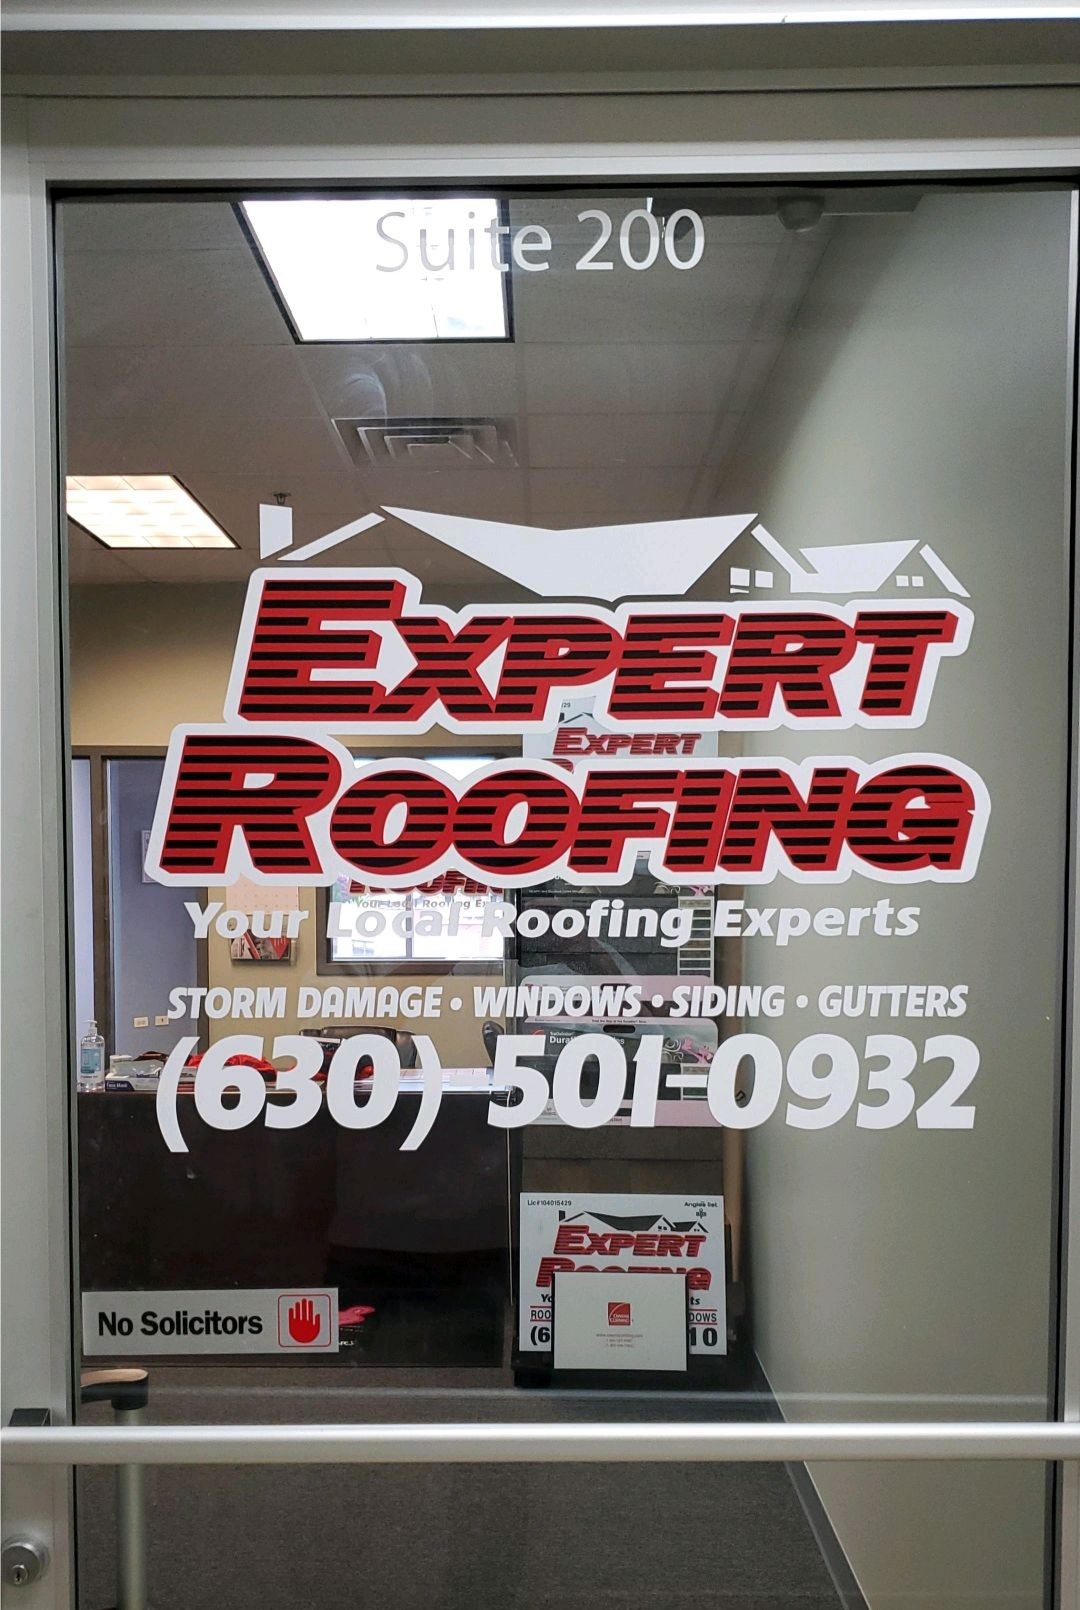 Expert Roofing Inc